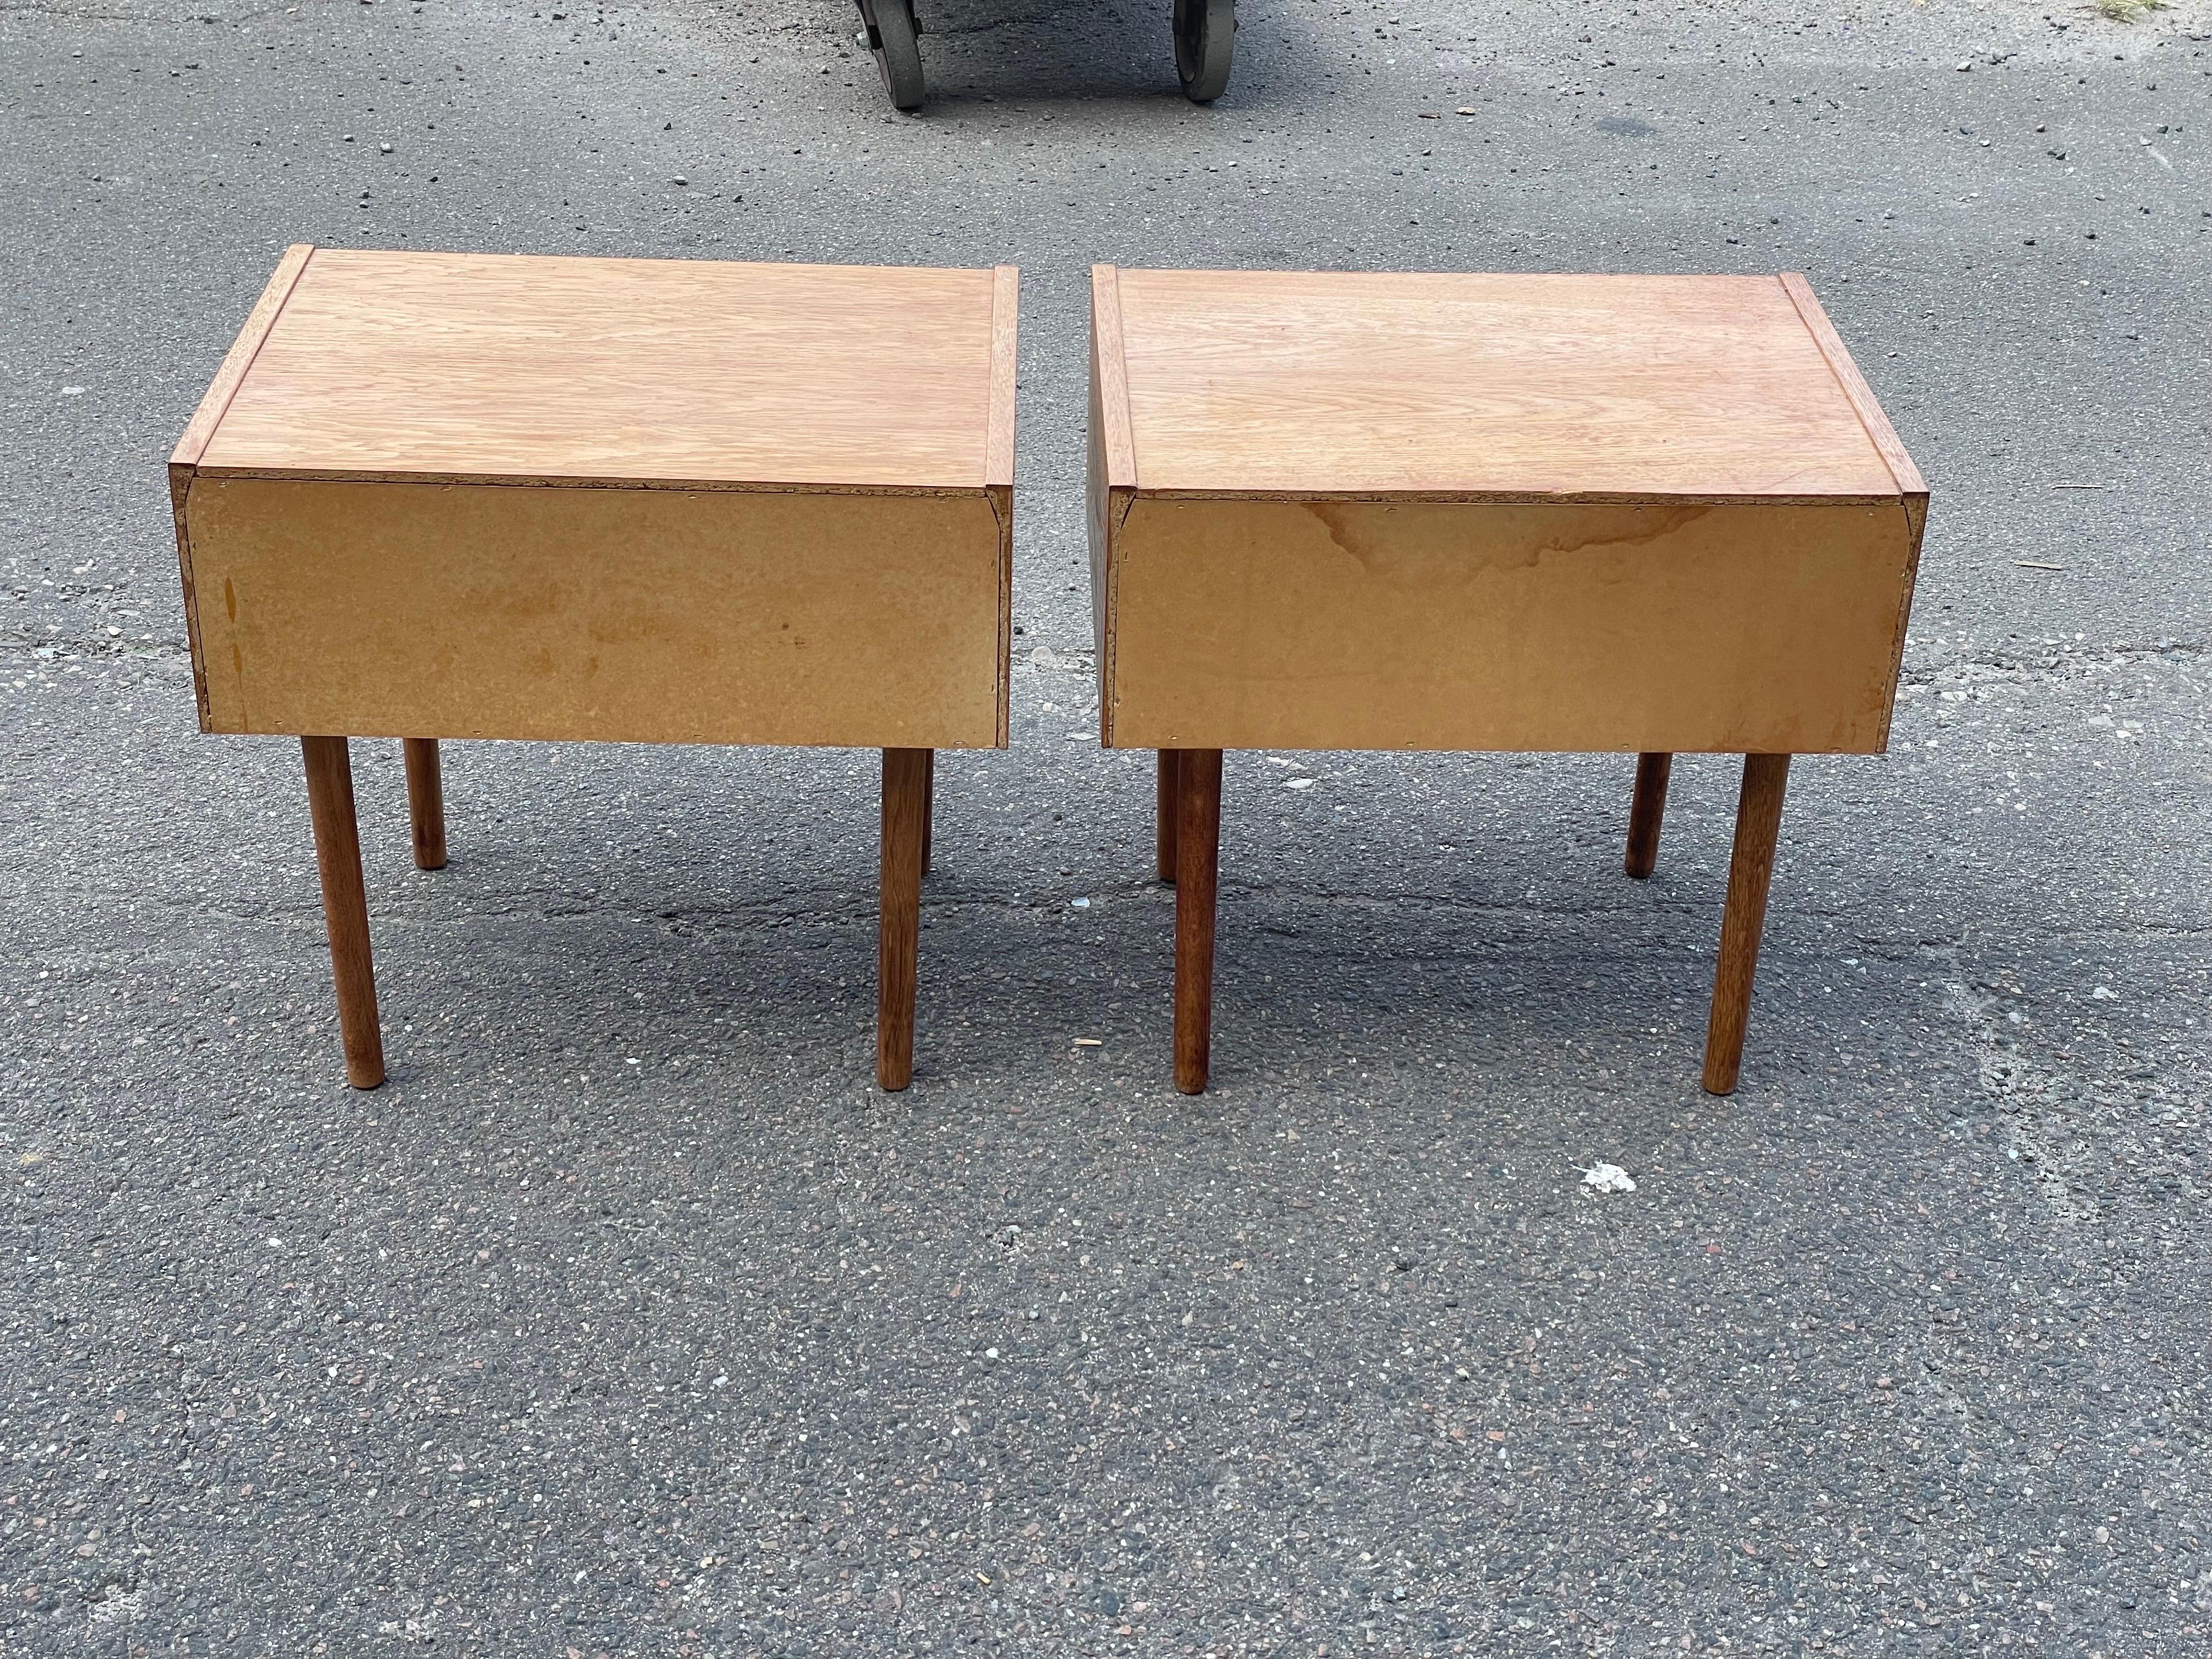 Set of Spacious Danish Mid-Century Modern Nightstands from the 1960s For Sale 11